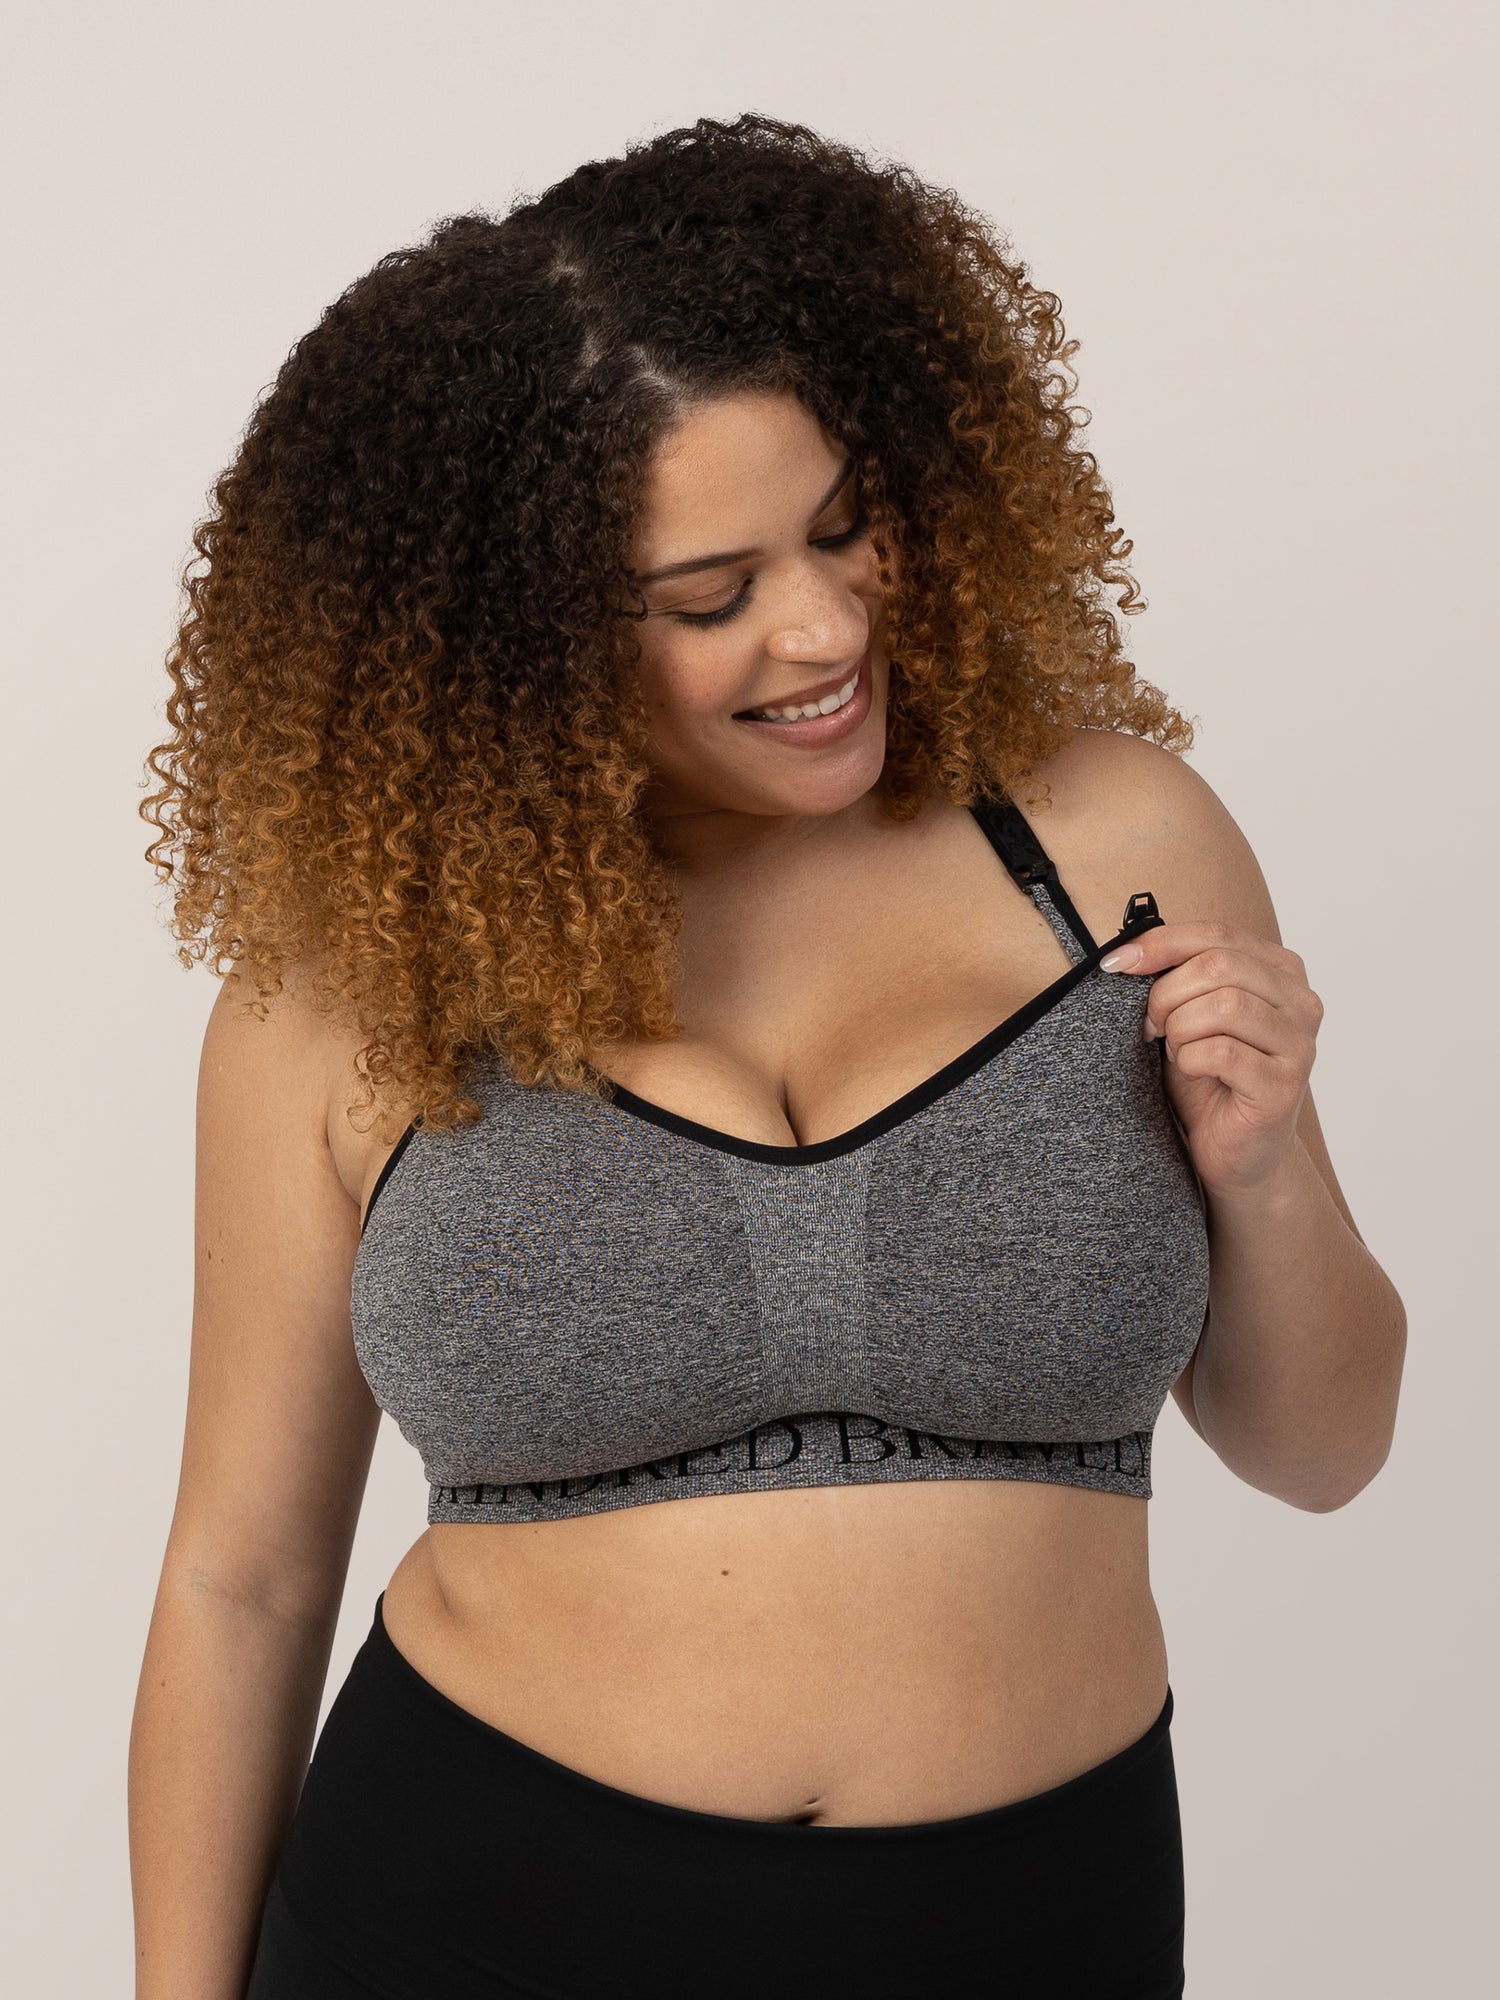 Model wearing the Sublime® Nursing Sports Bra in Heather Grey showing off the easy clip down nursing access.